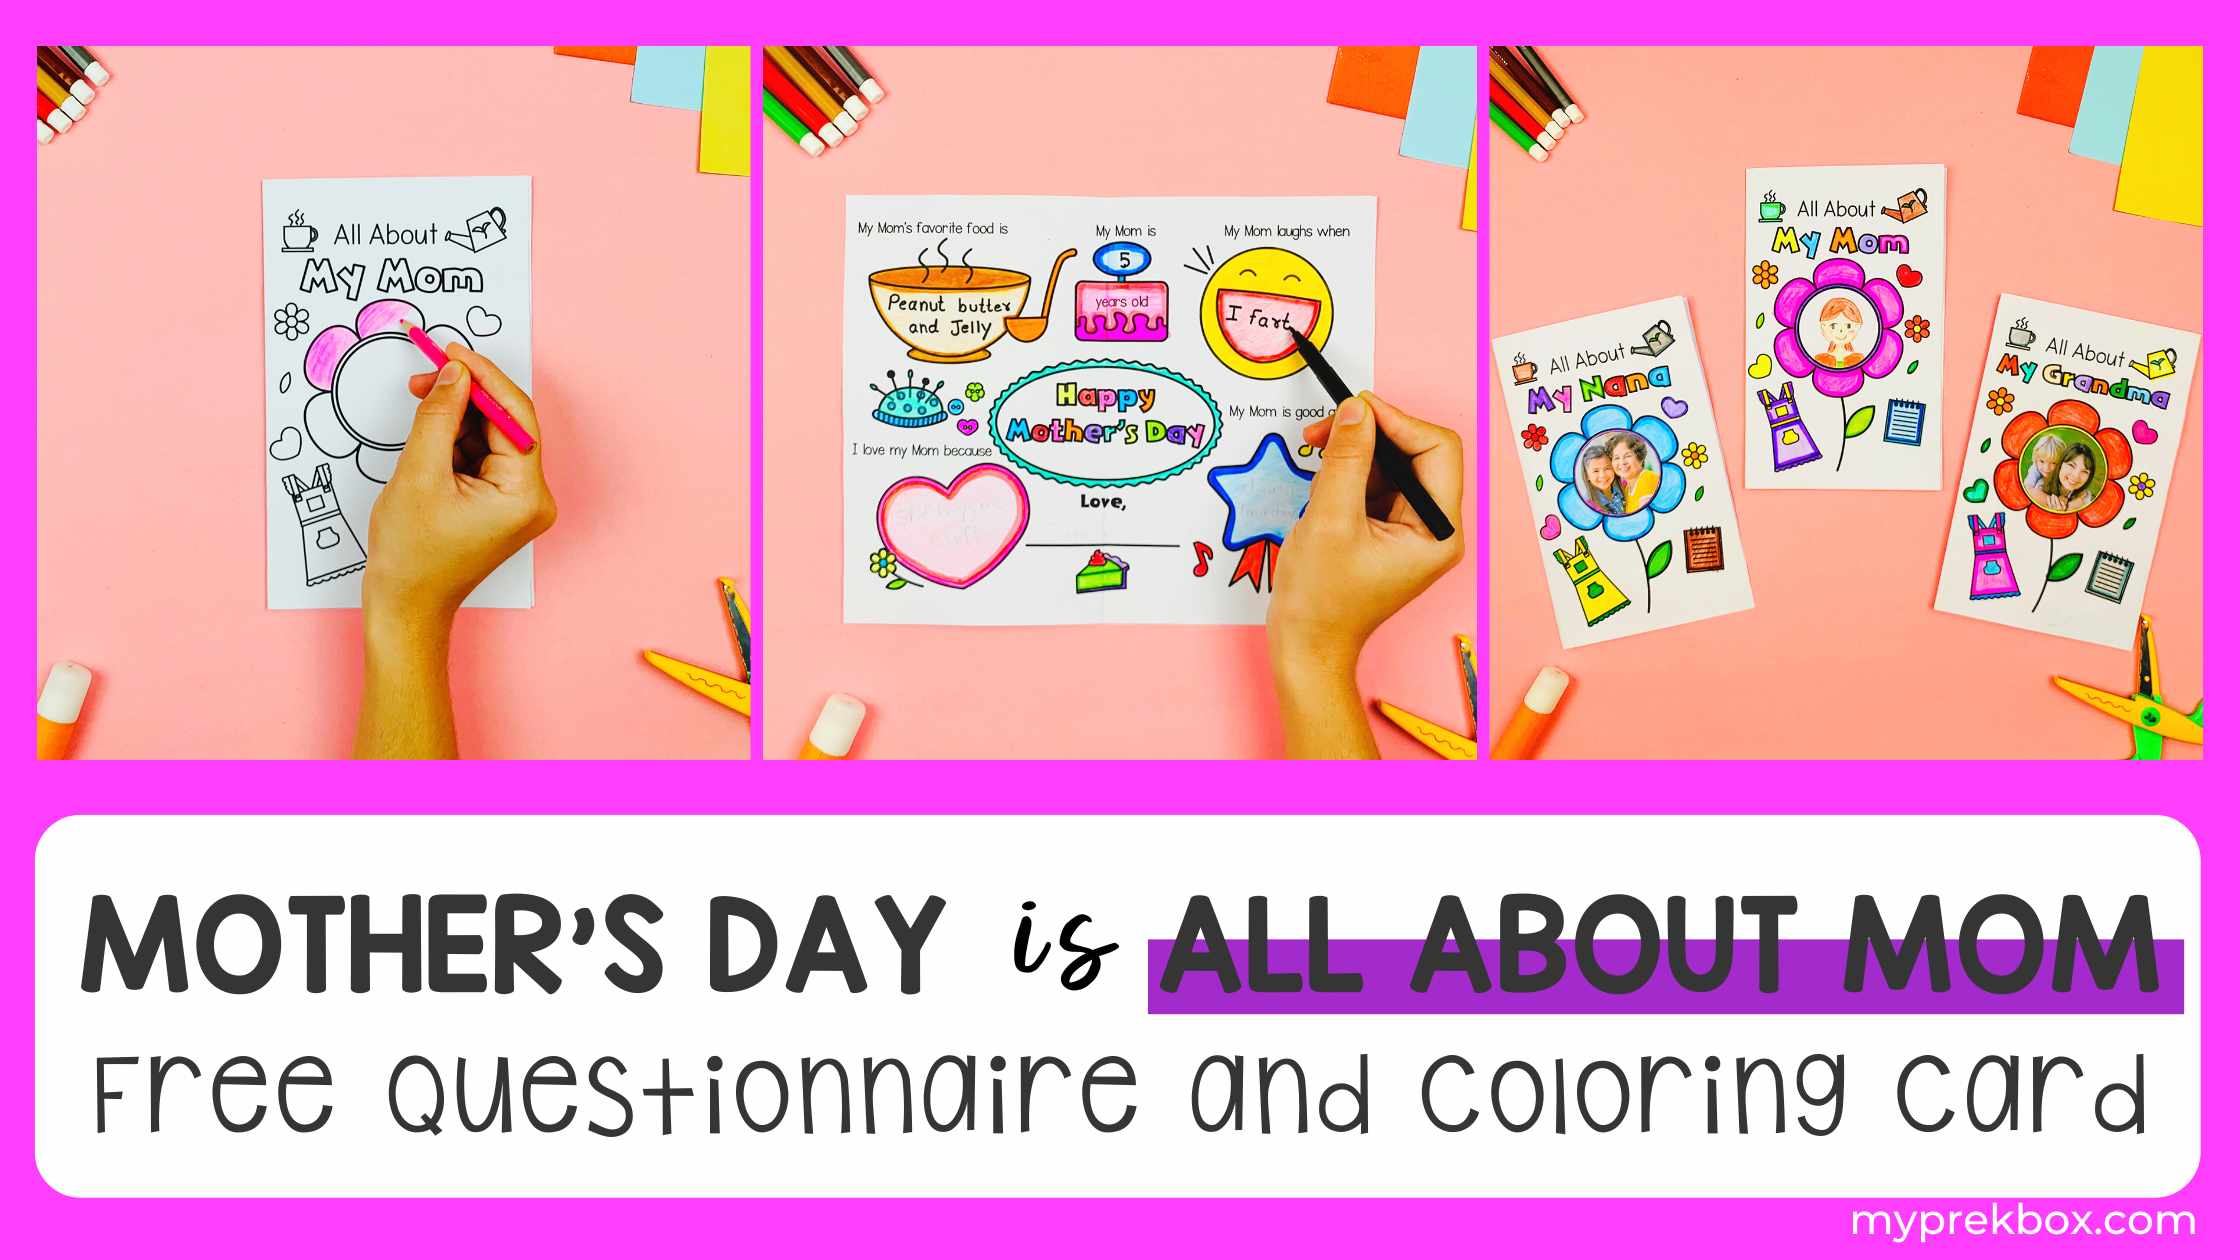 Easy Mother's Day Gift: All About My Mom Questionnaire Coloring Card